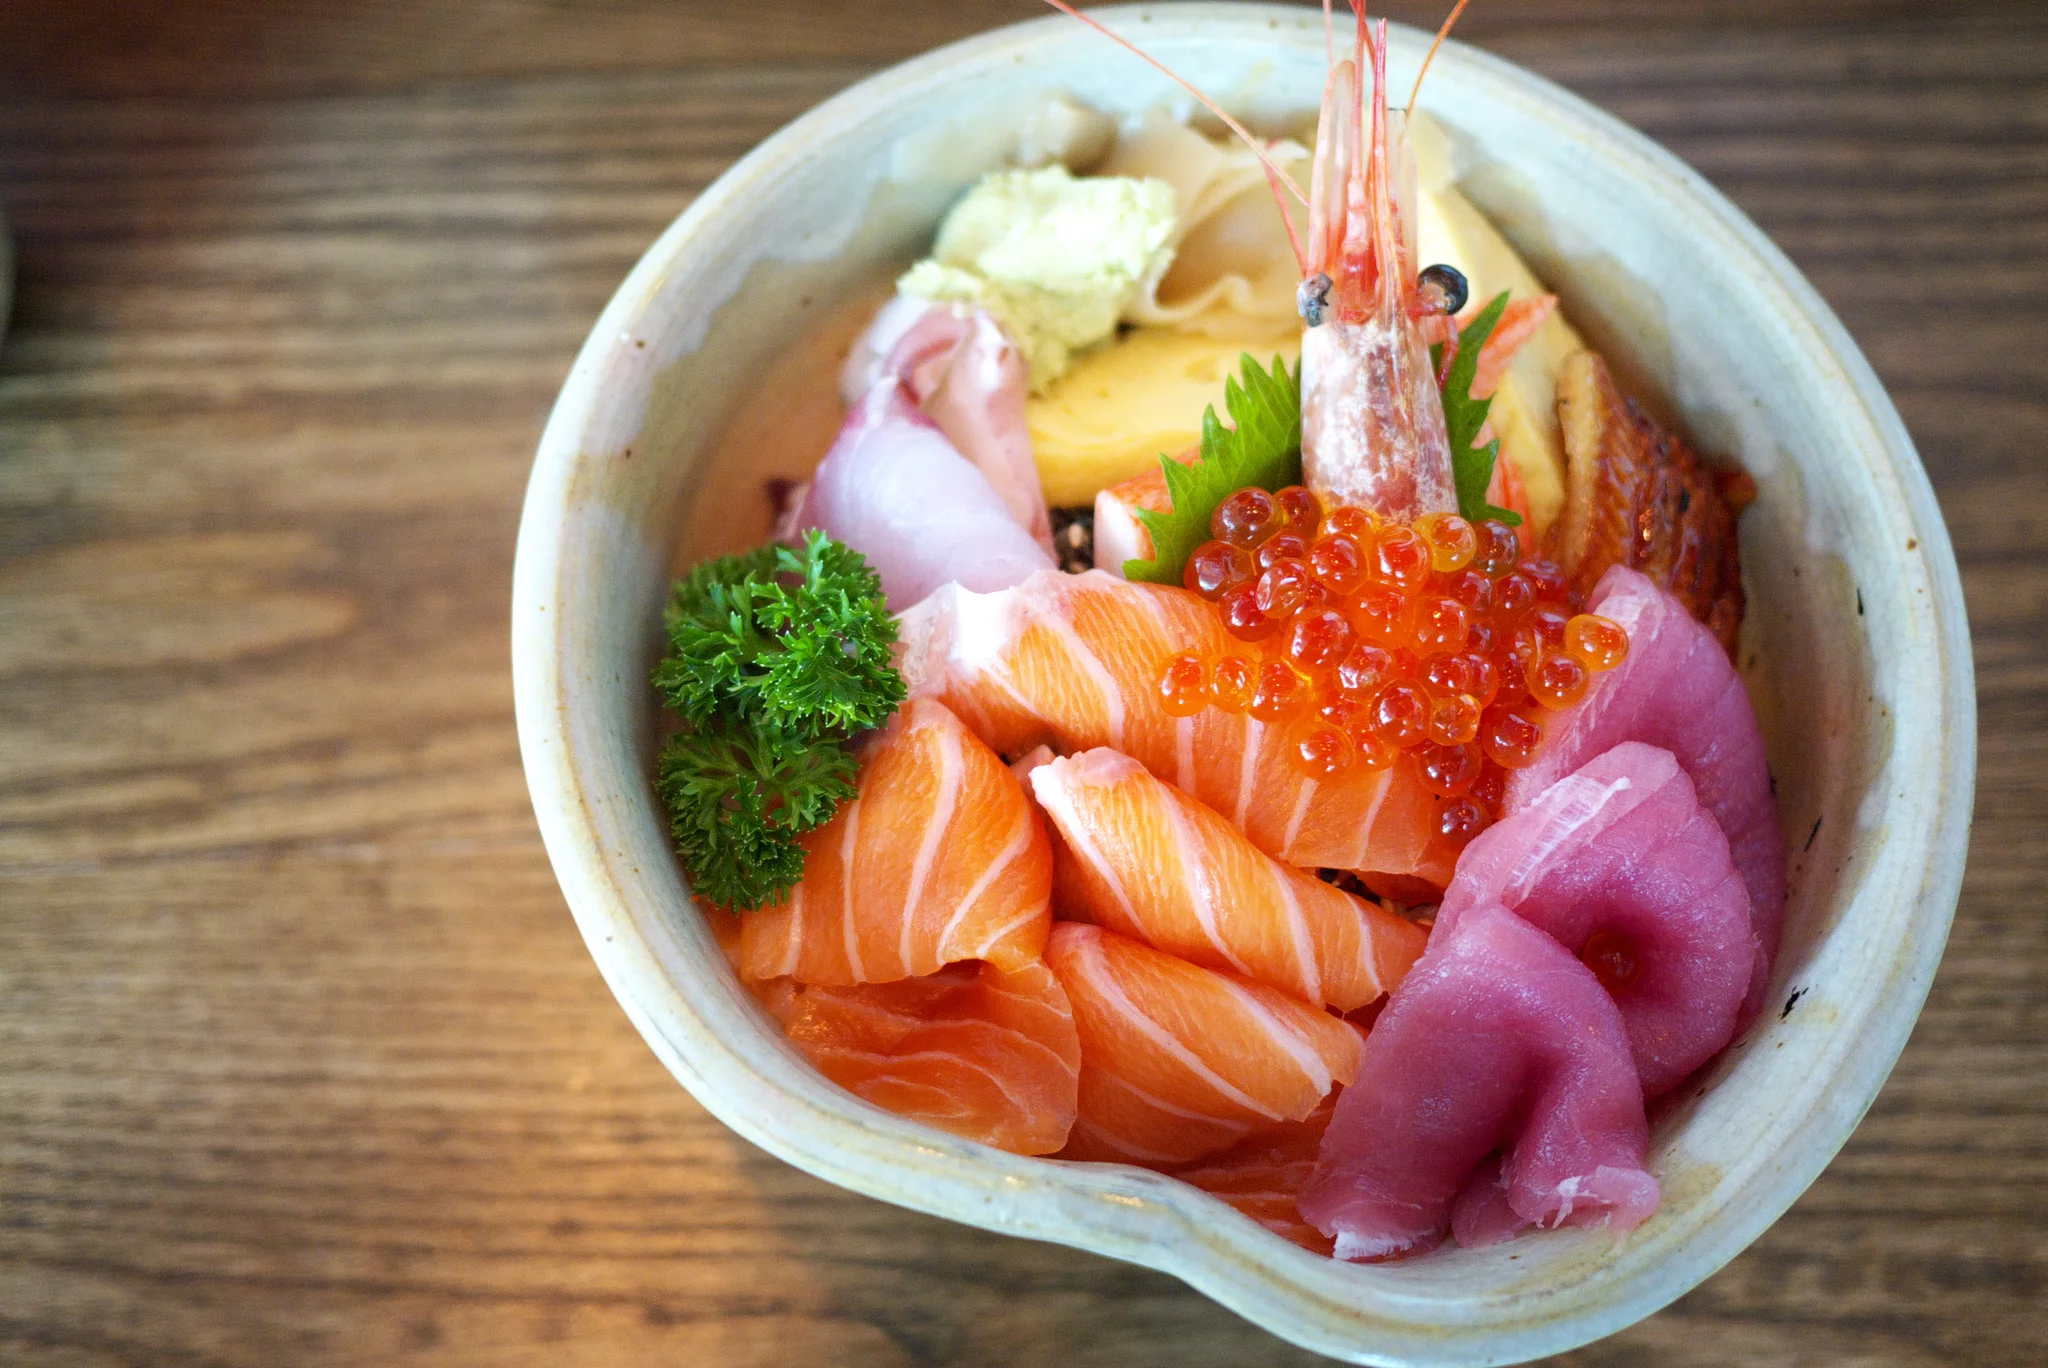 What is the purpose of pickled ginger in sushi and sashimi?